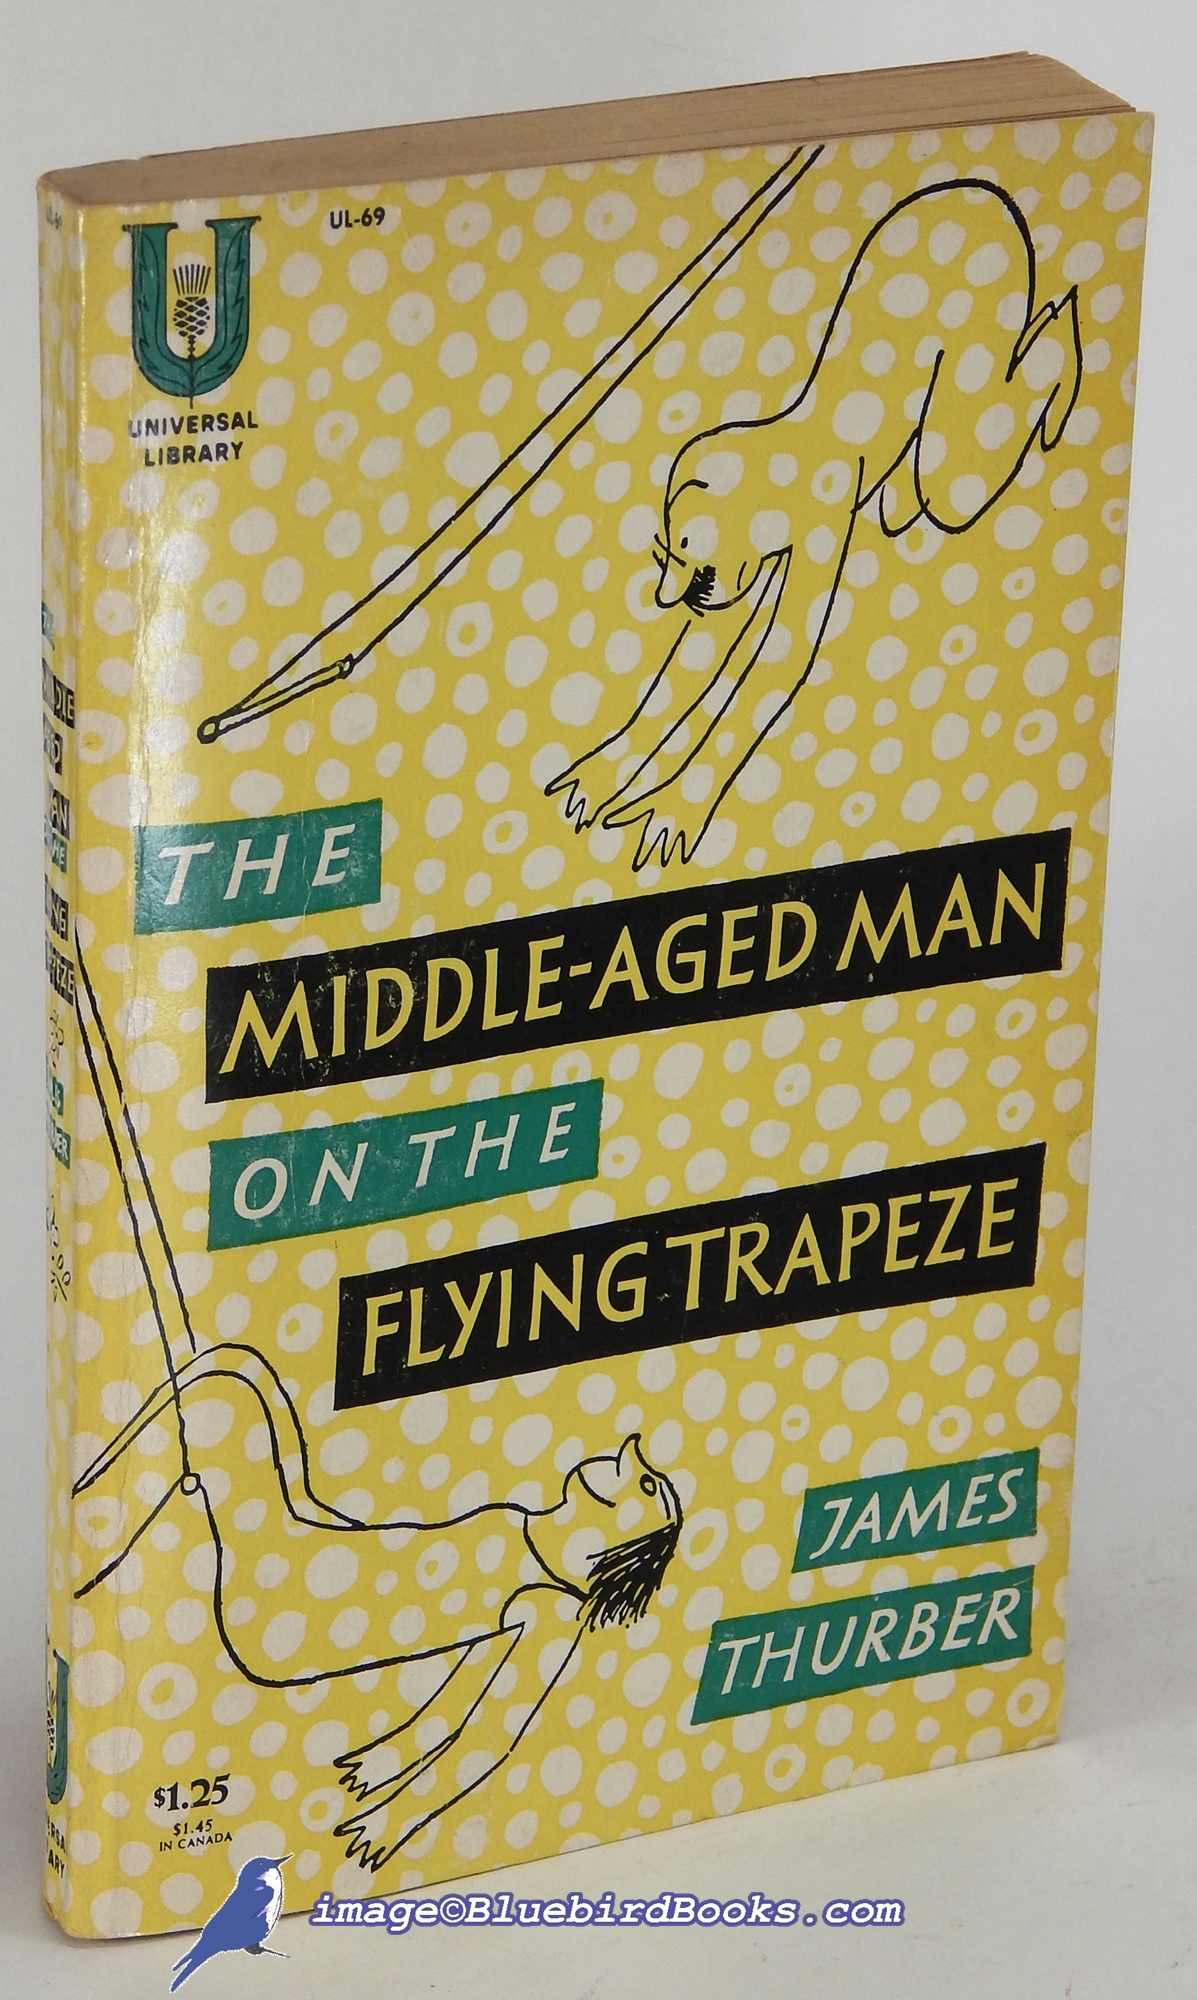 THURBER, JAMES - The Middle-Aged Man on the Flying Trapeze: A Collection of Short Pieces with Drawings by the Author